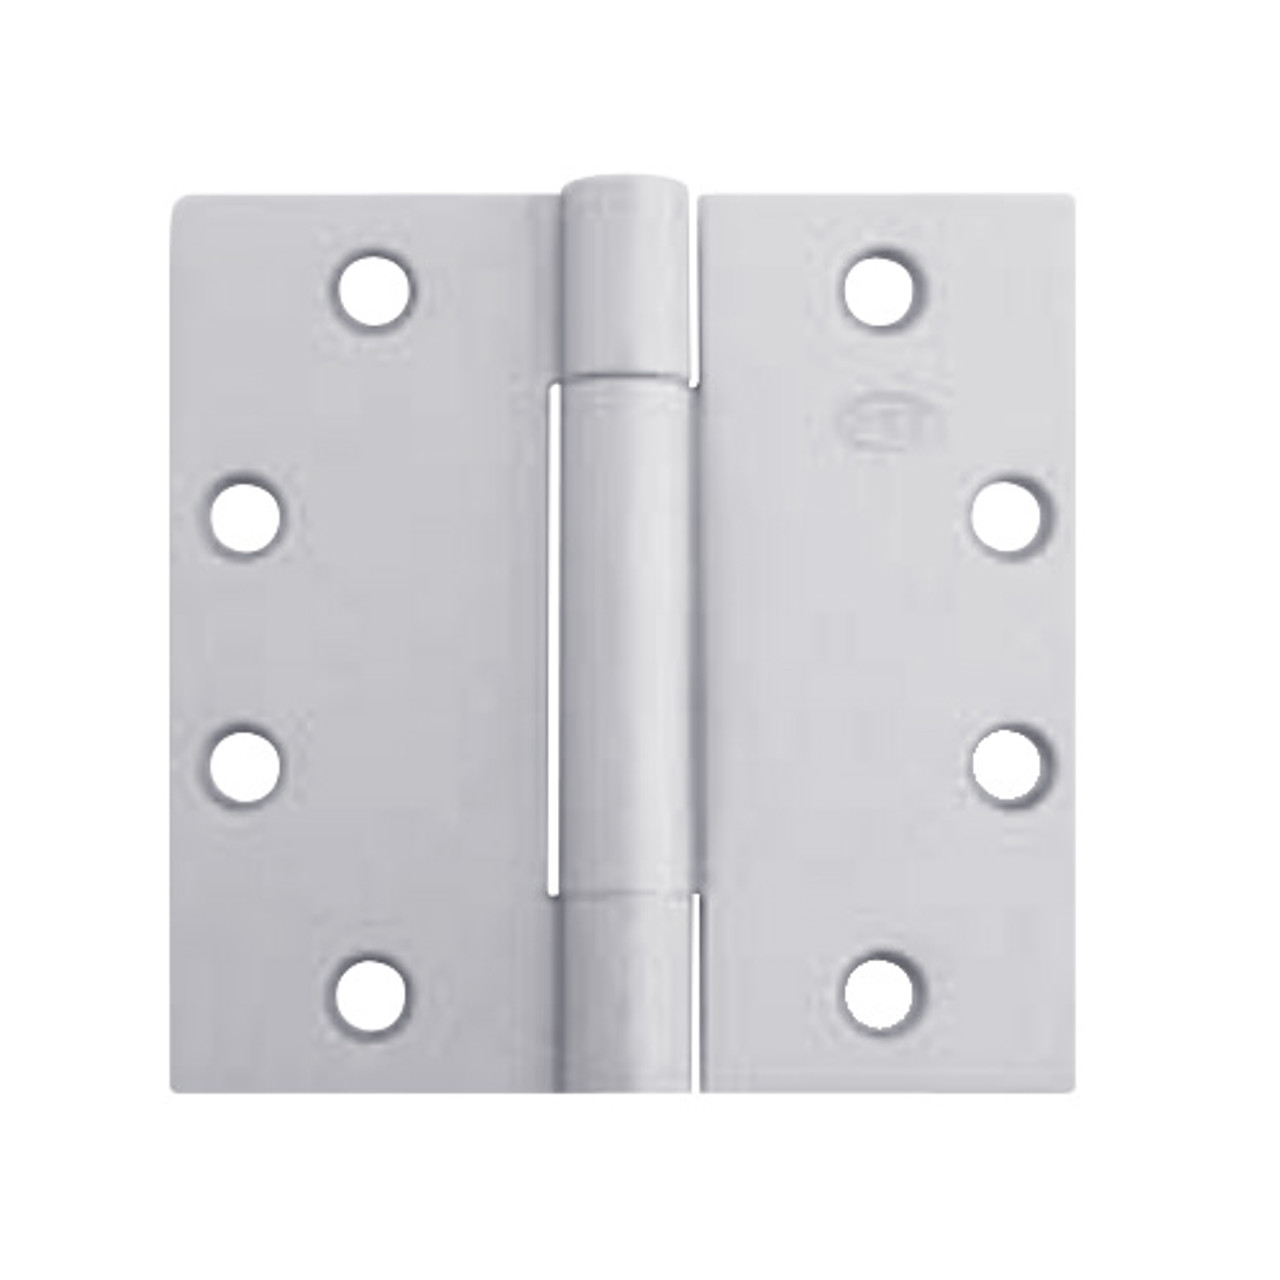 3CB1WT-5x7-652 IVES 3 Knuckle Concealed Bearing Full Mortise Wide Throw Butt Hinge in Satin Chrome Plated